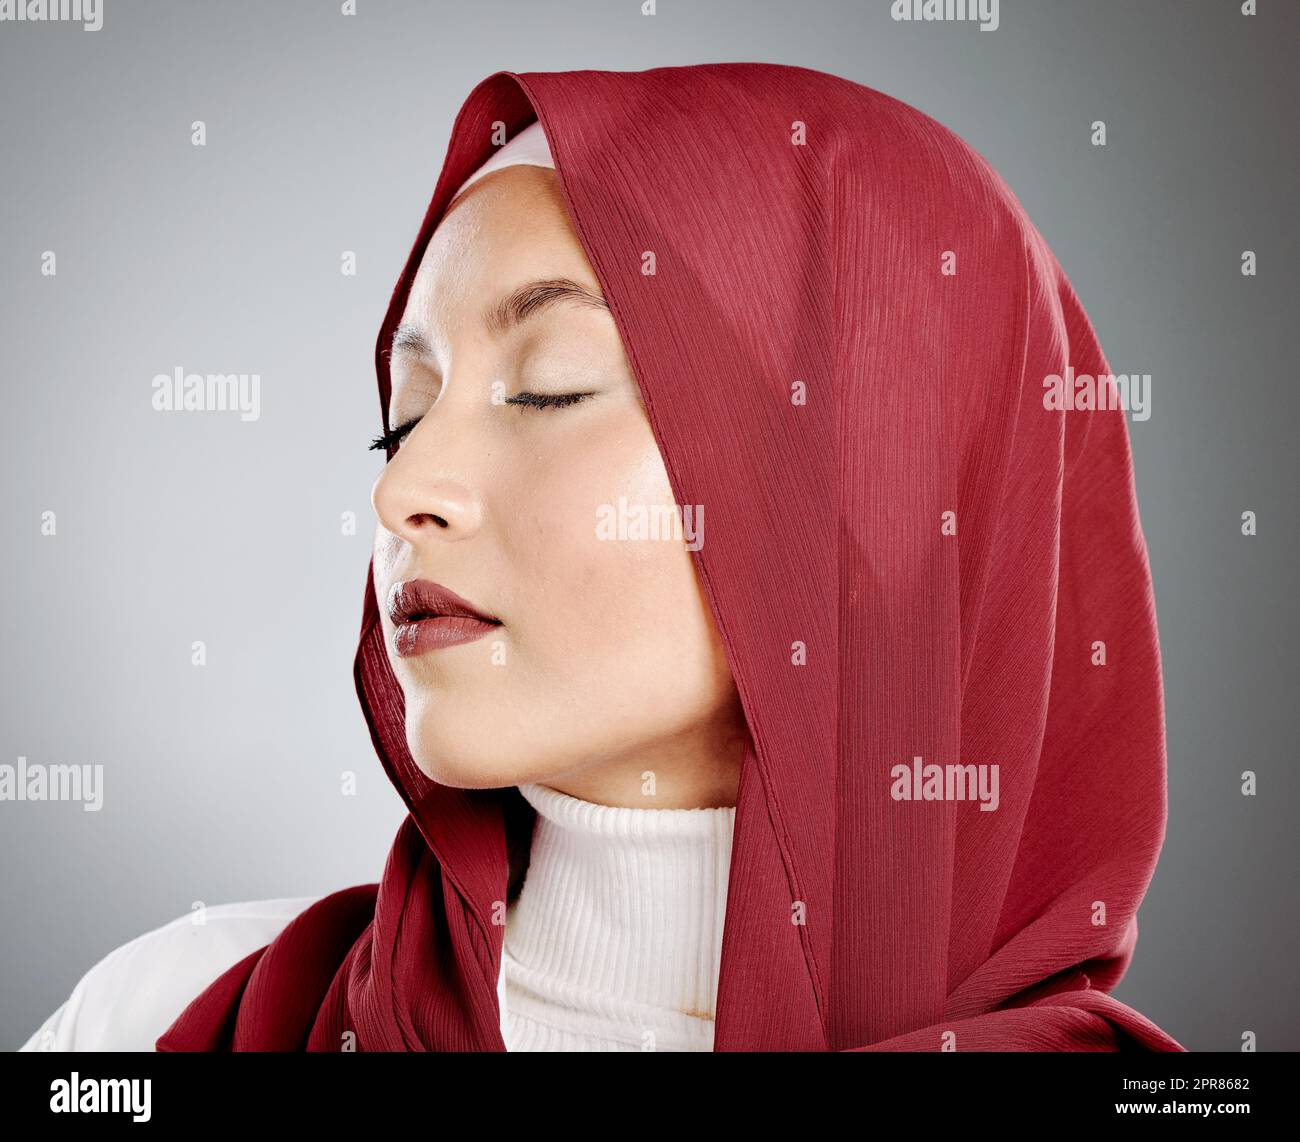 Stylish young muslim woman in a red hijab with her eyes closed on a grey studio background. Middle eastern woman wearing makeup and a headscarf while feeling calm and showing the beauty in modesty Stock Photo